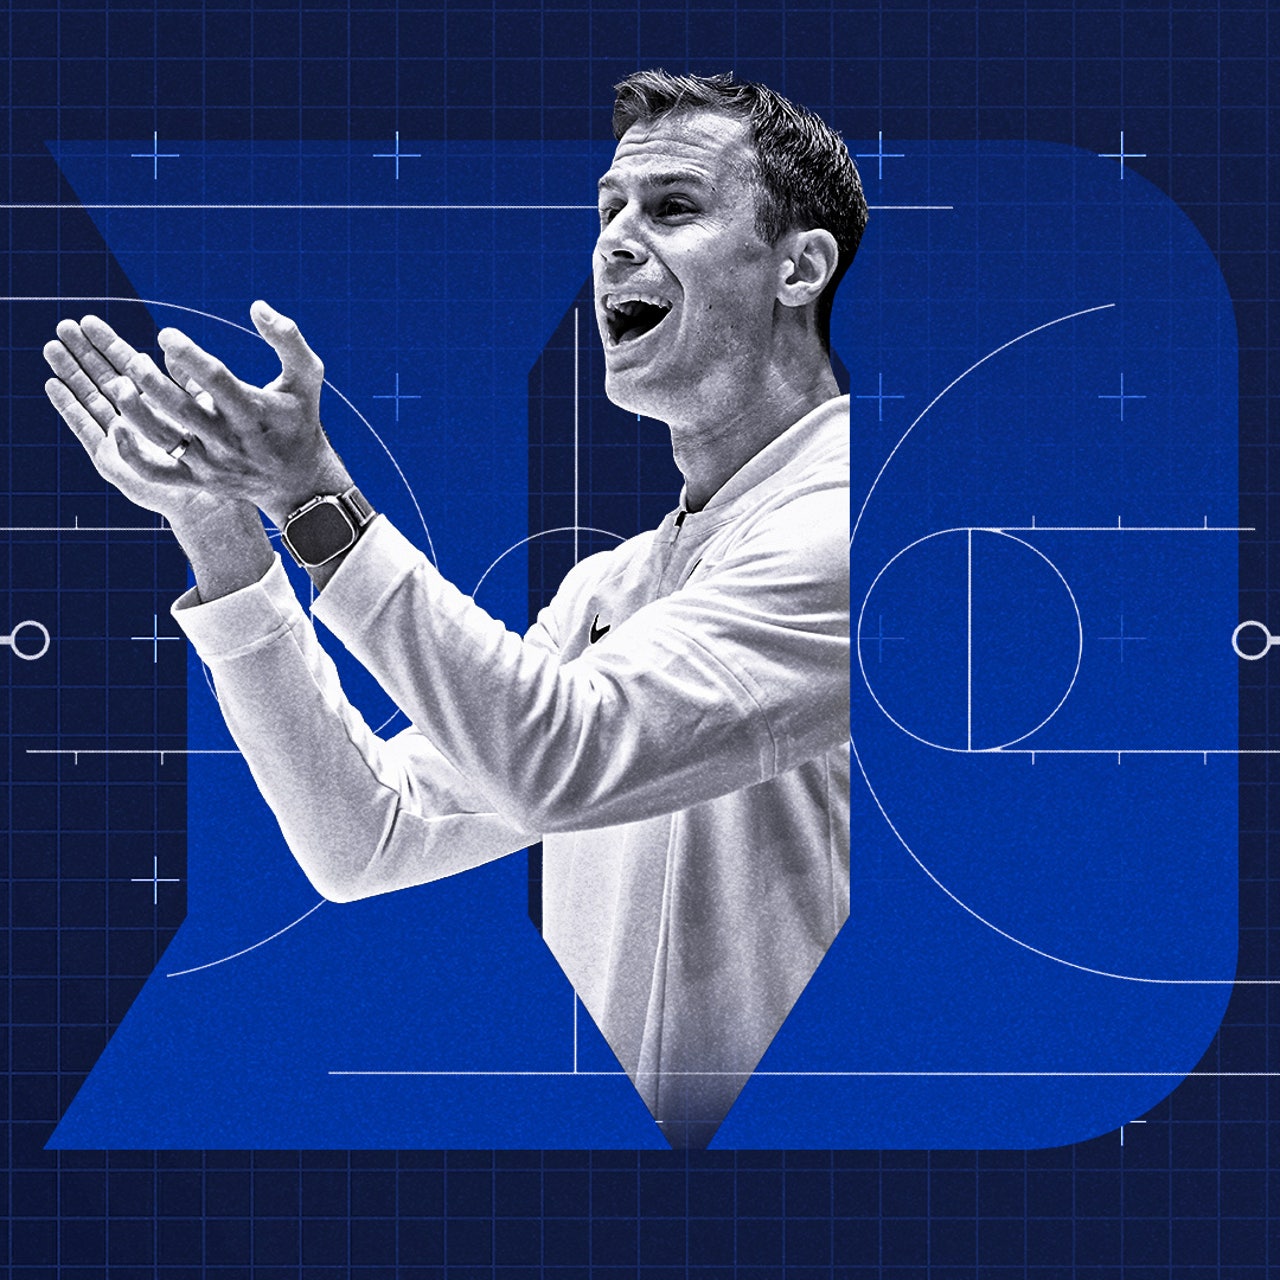 5 things to know about Jon Scheyer, the former Glenbrook North